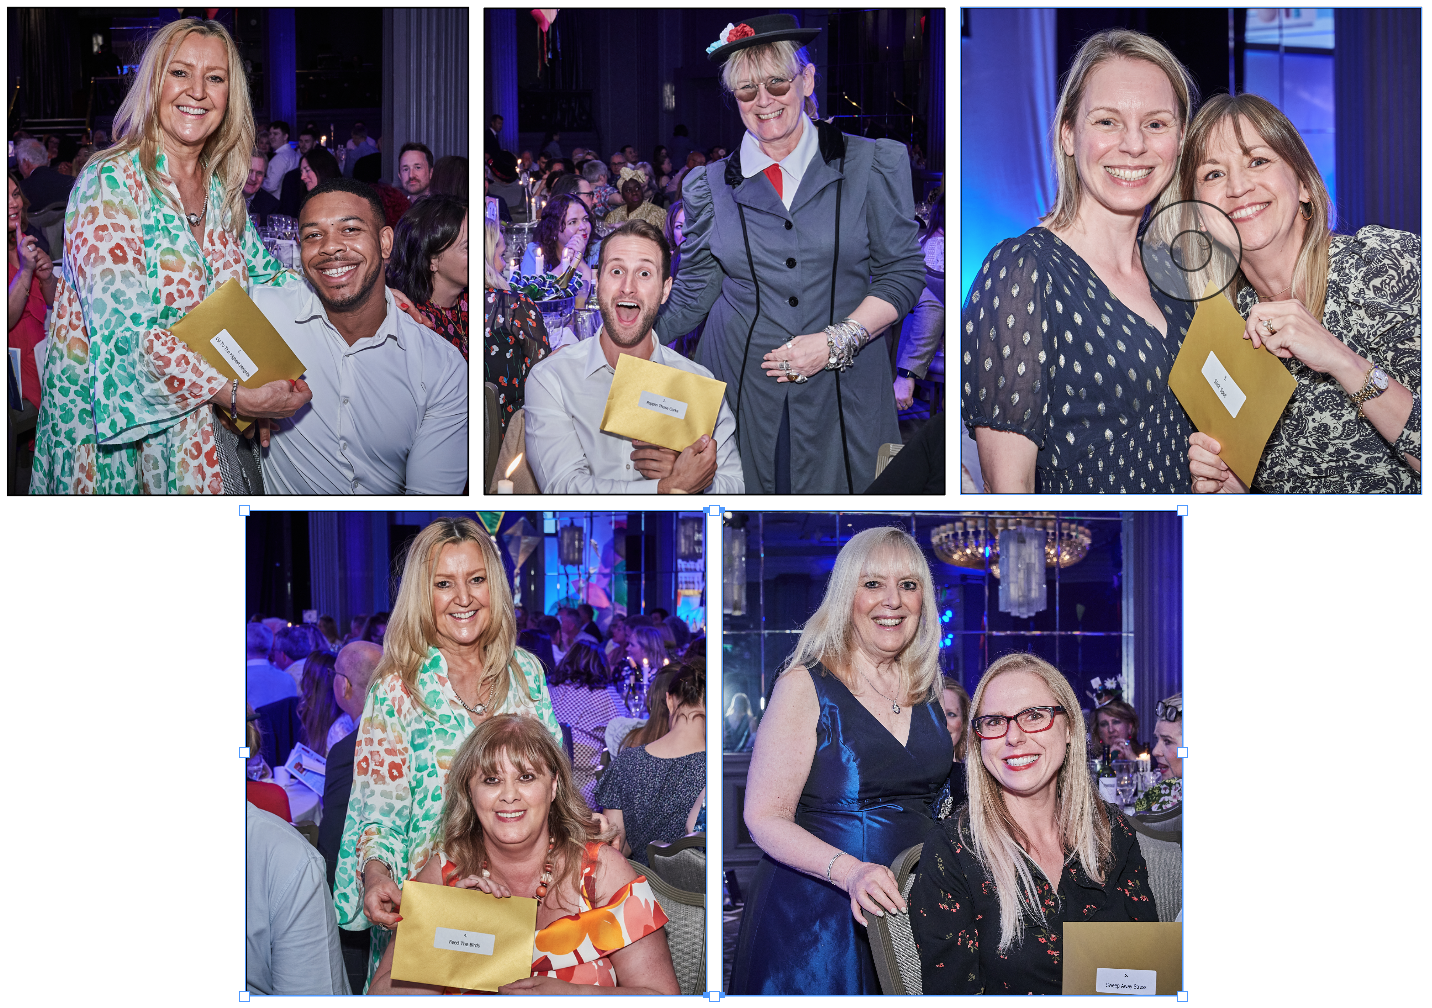 Above: Some lucky raffle winners (clockwise from top left) Reece Campbell, Ross Gordon, Penny Bailey, Ingi Phillips, and Hannah Fletcher, with raffle prize presenters, Presentation’s Andrea Pinder and Max Publishing’s Tracey Bearton, Sam Loveday and Sue Marks